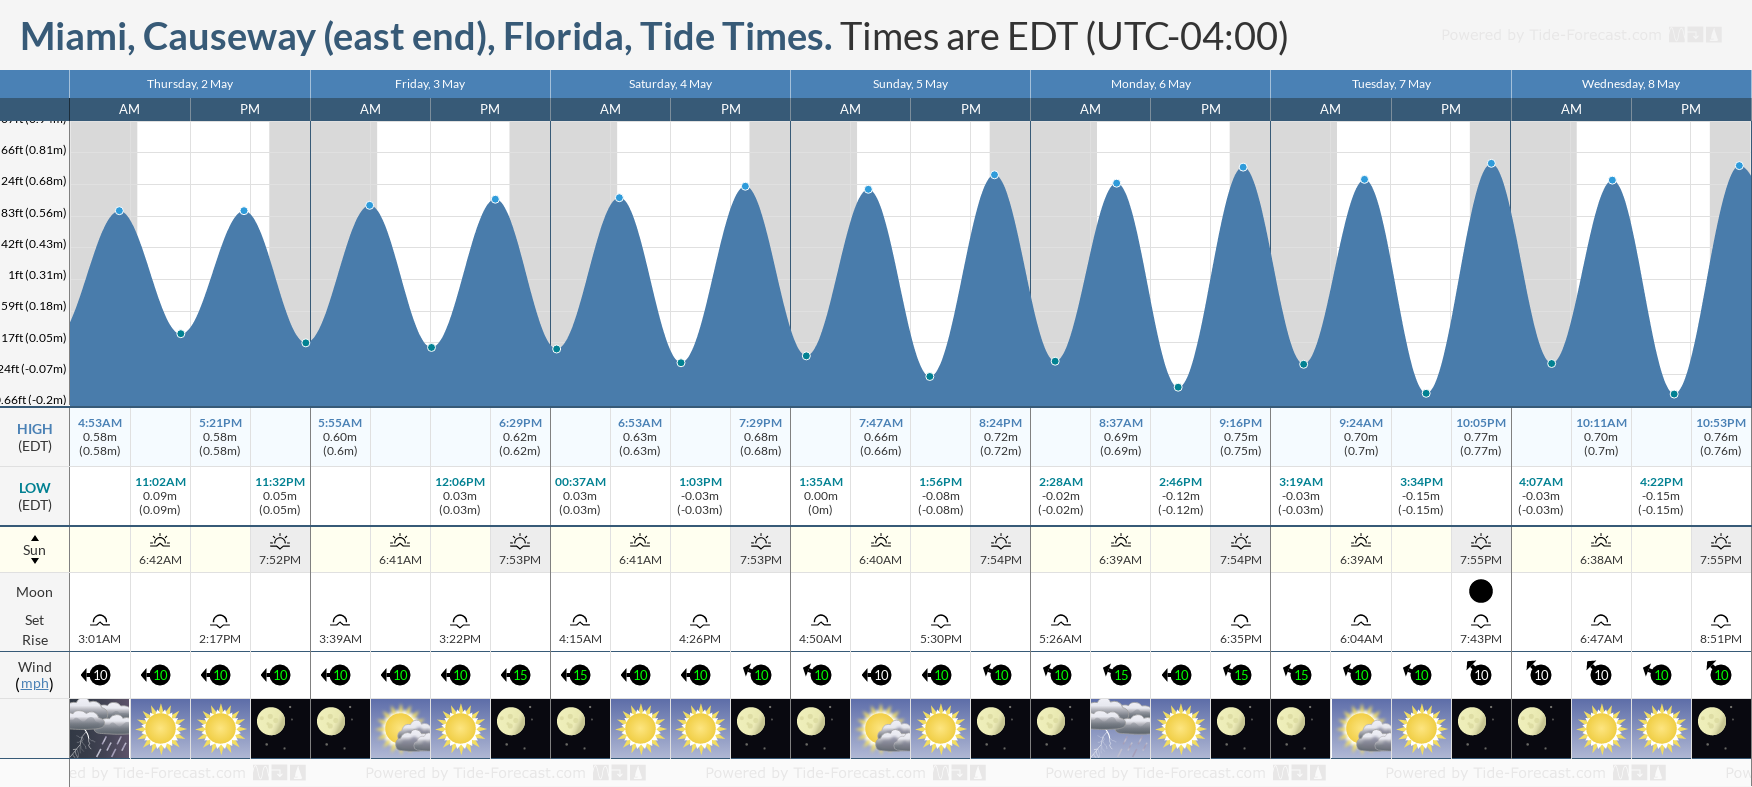 Miami, Causeway (east end), Florida Tide Chart including high and low tide times for the next 7 days